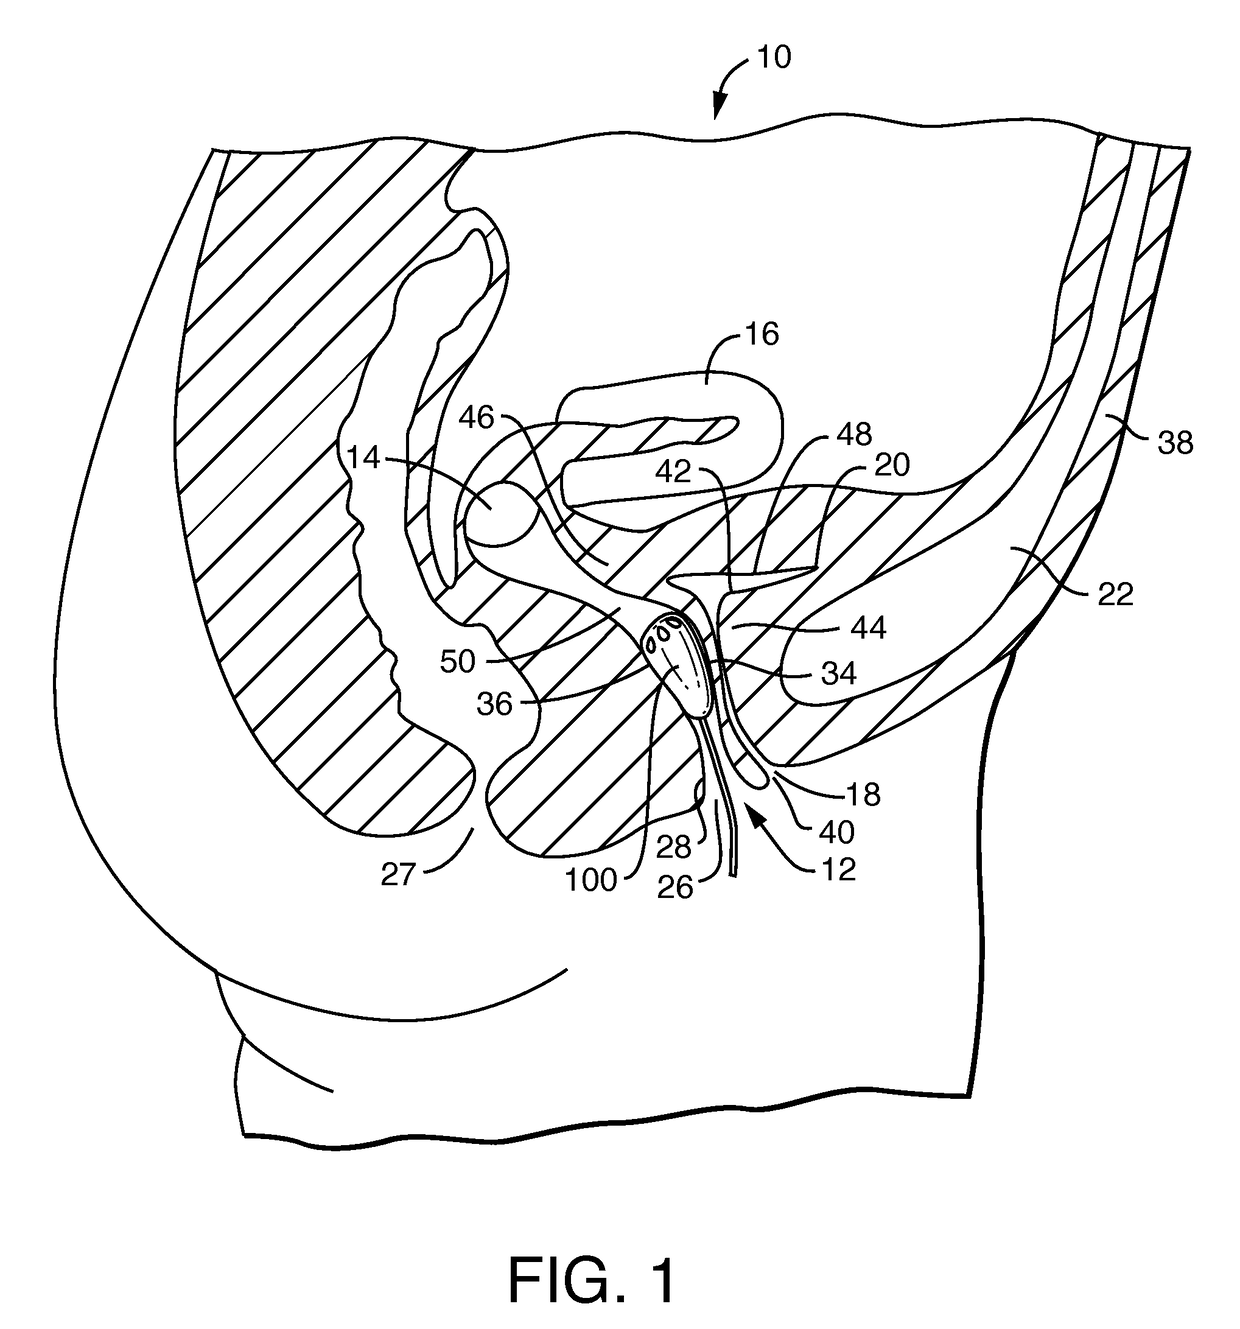 Vaginal insert device having a support portion with plurality of foldable areas